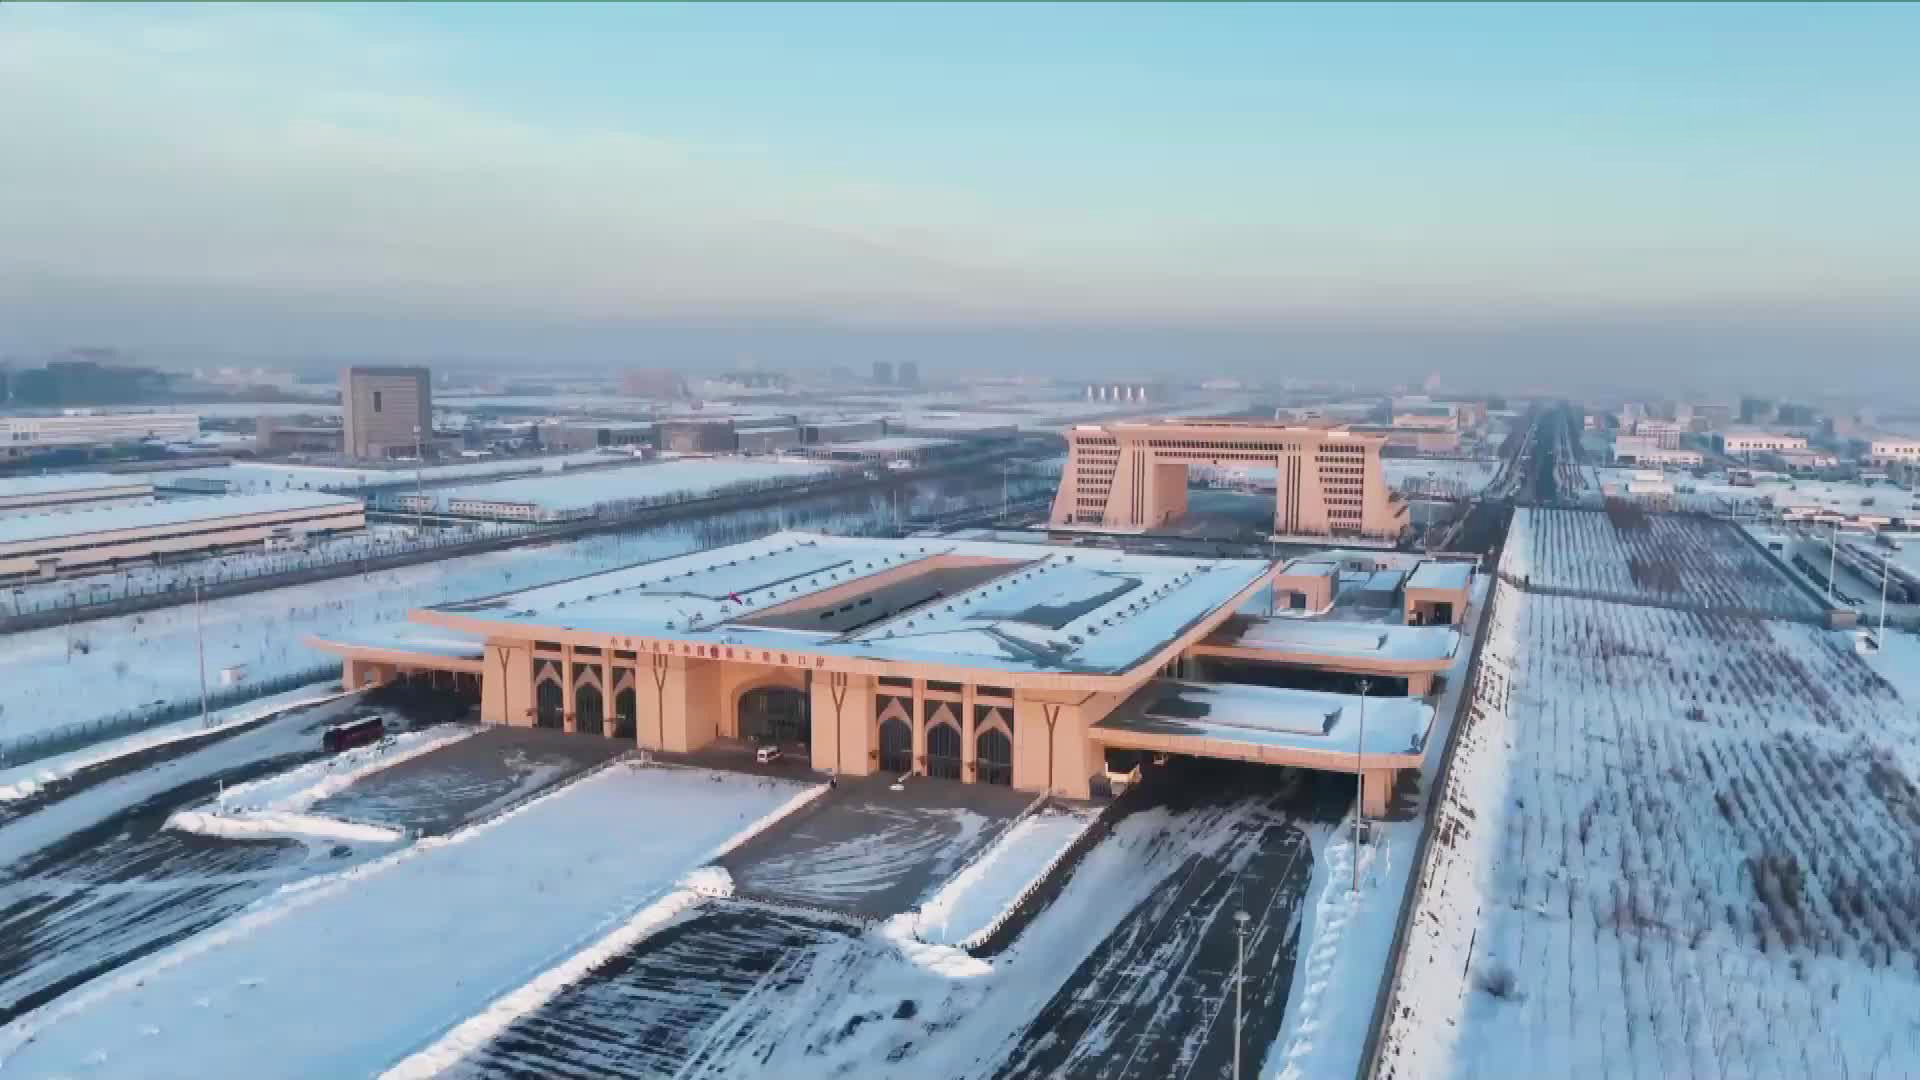 Live: Winter view of Khorgos in northwest China's Xinjiang – Ep. 6